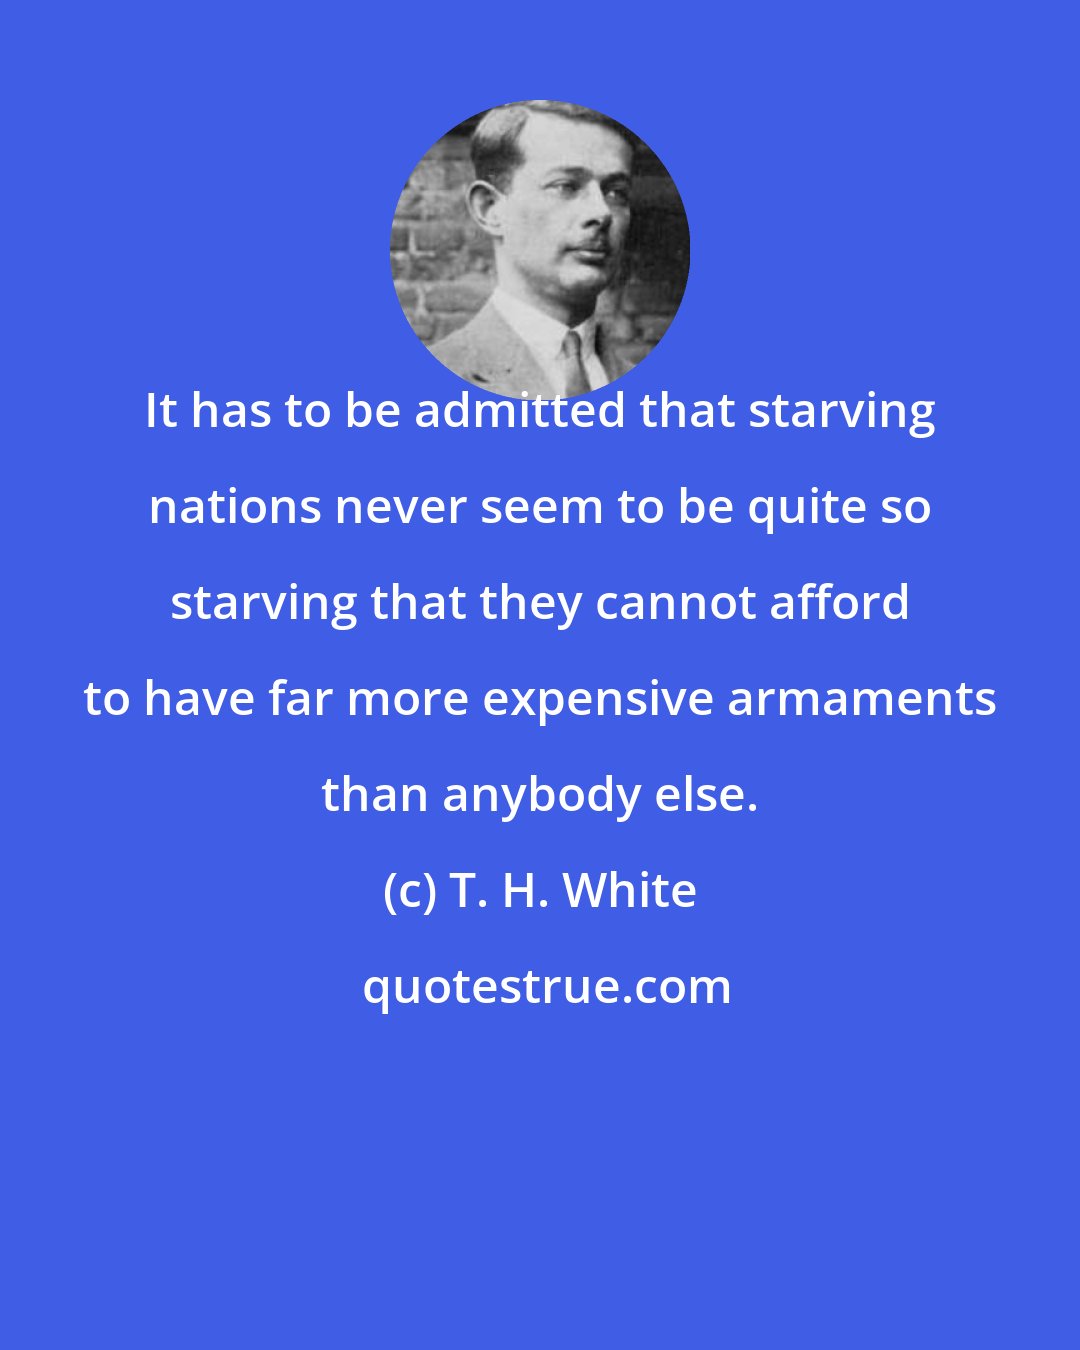 T. H. White: It has to be admitted that starving nations never seem to be quite so starving that they cannot afford to have far more expensive armaments than anybody else.